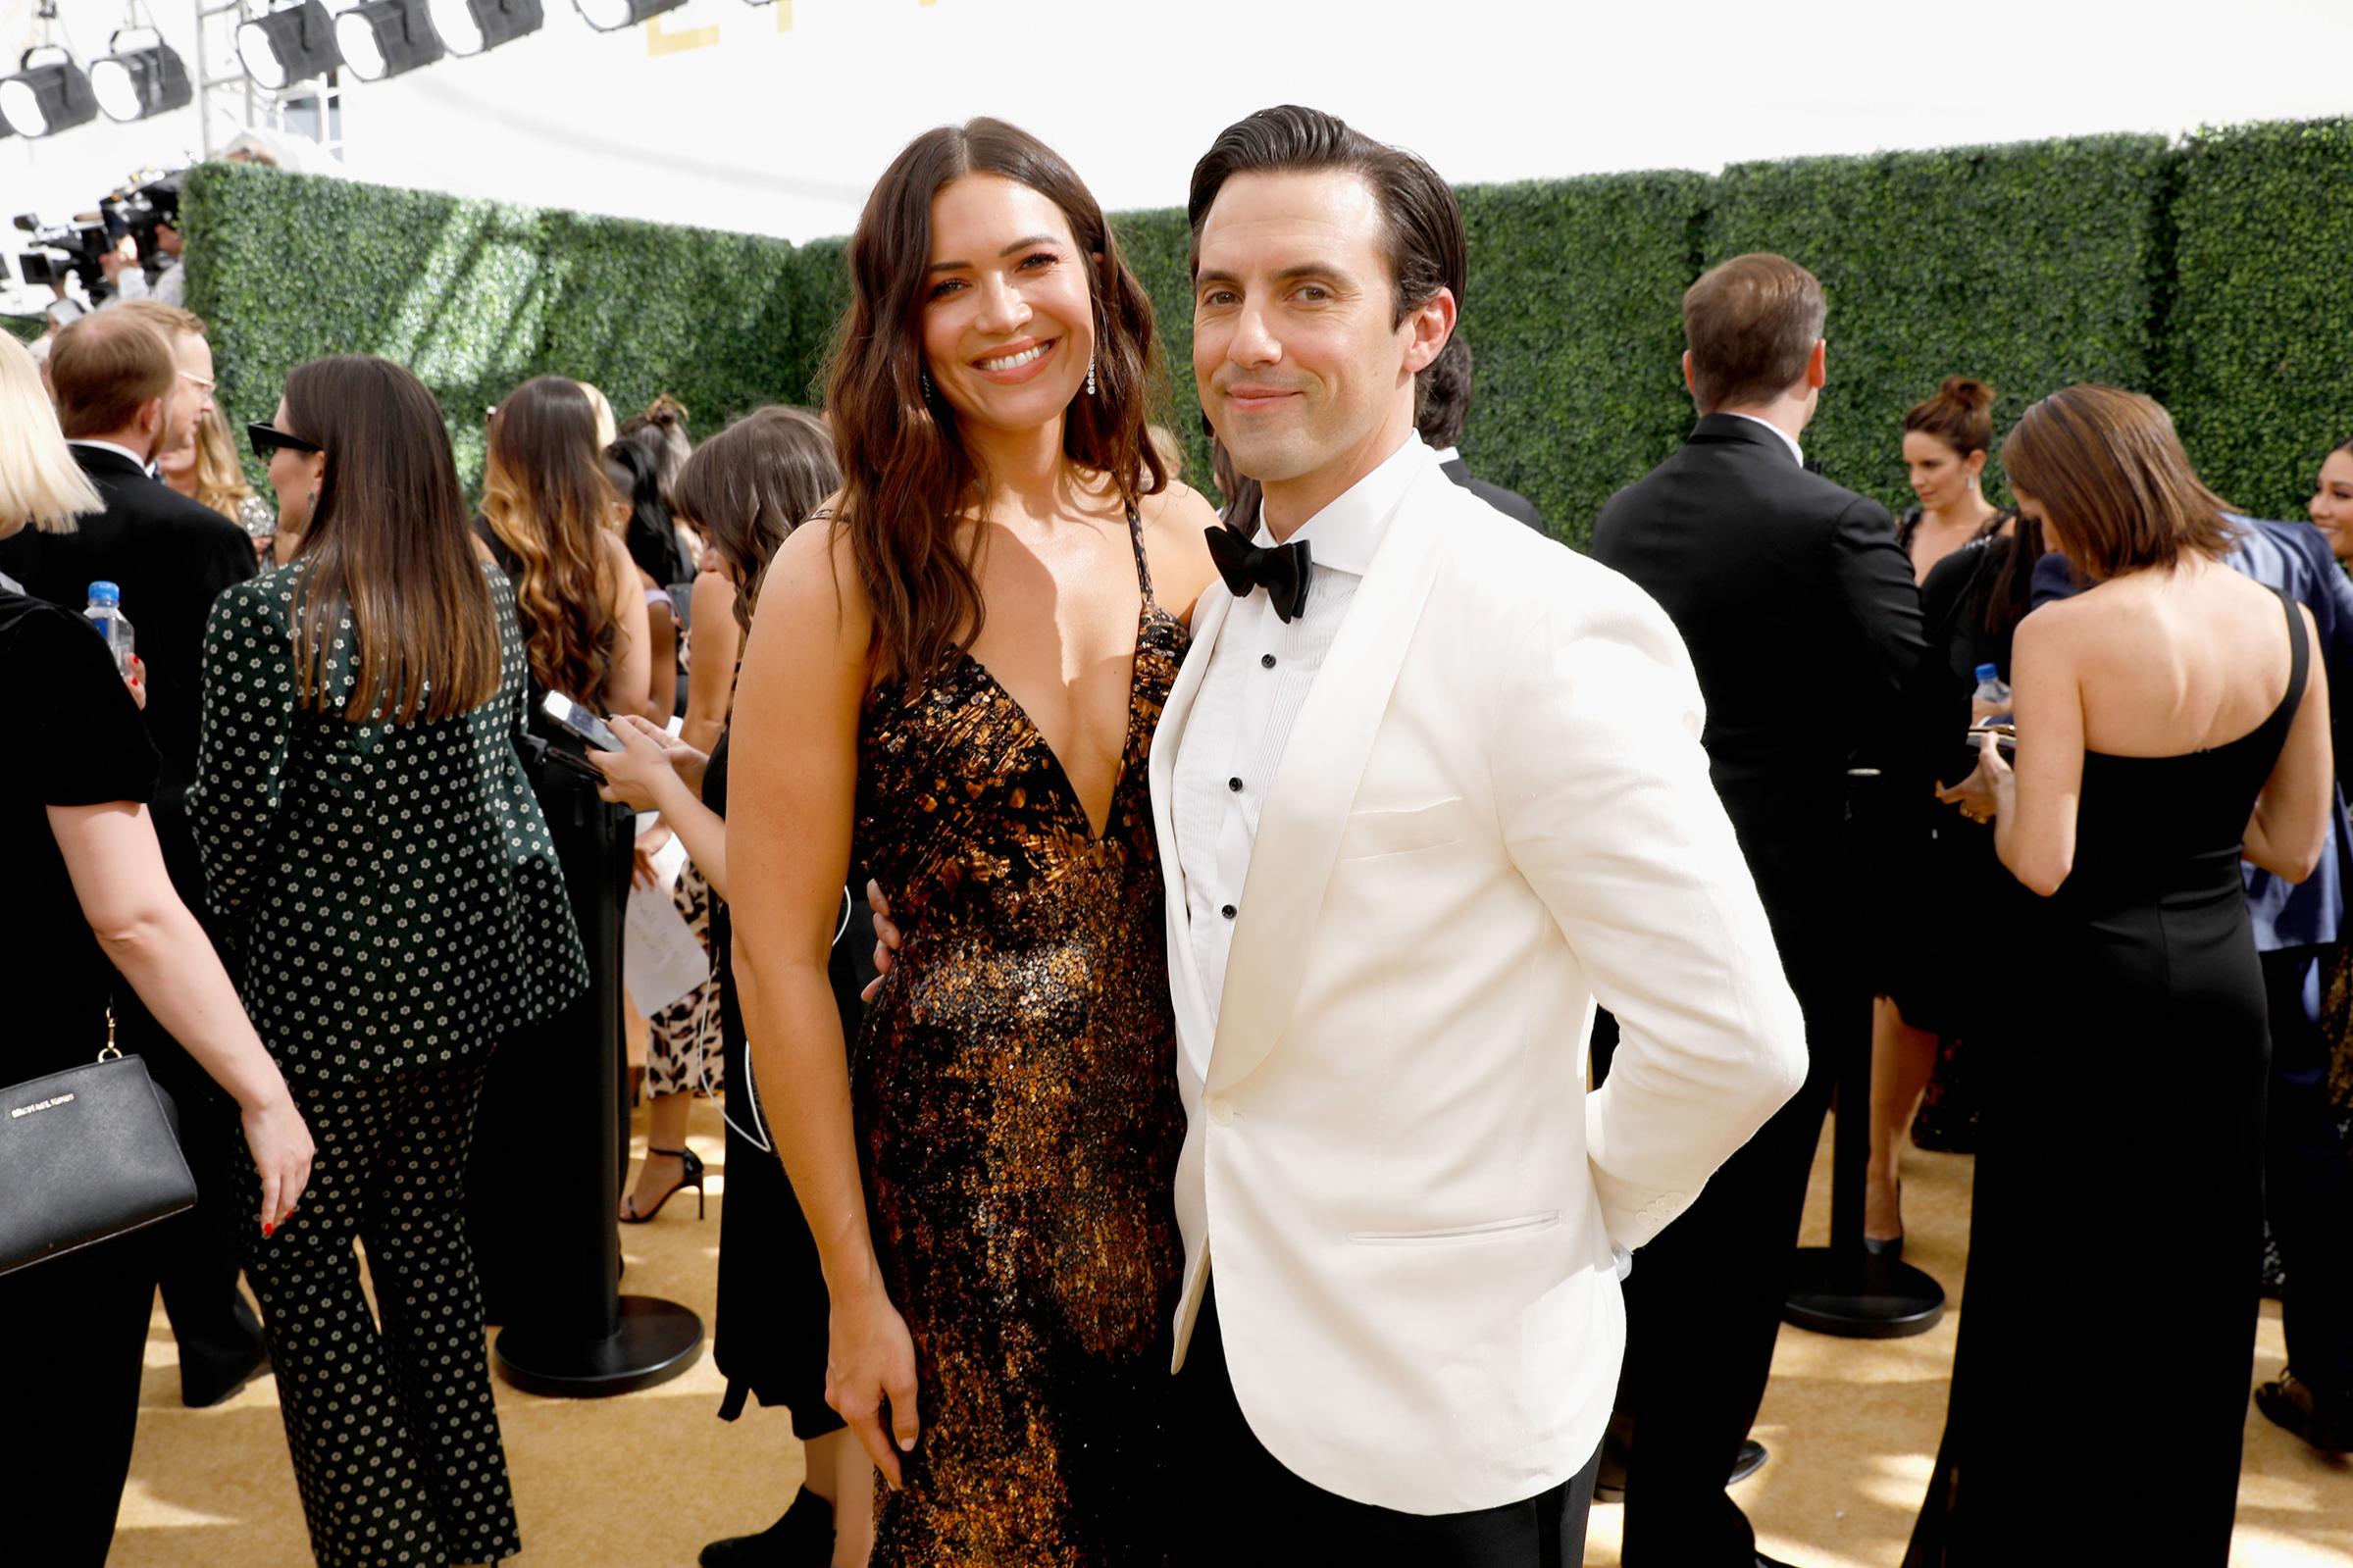 Actors Mandy Moore and Milo Ventimiglia arrive to the 70th Annual Primetime Emmy Awards on Sept. 17.